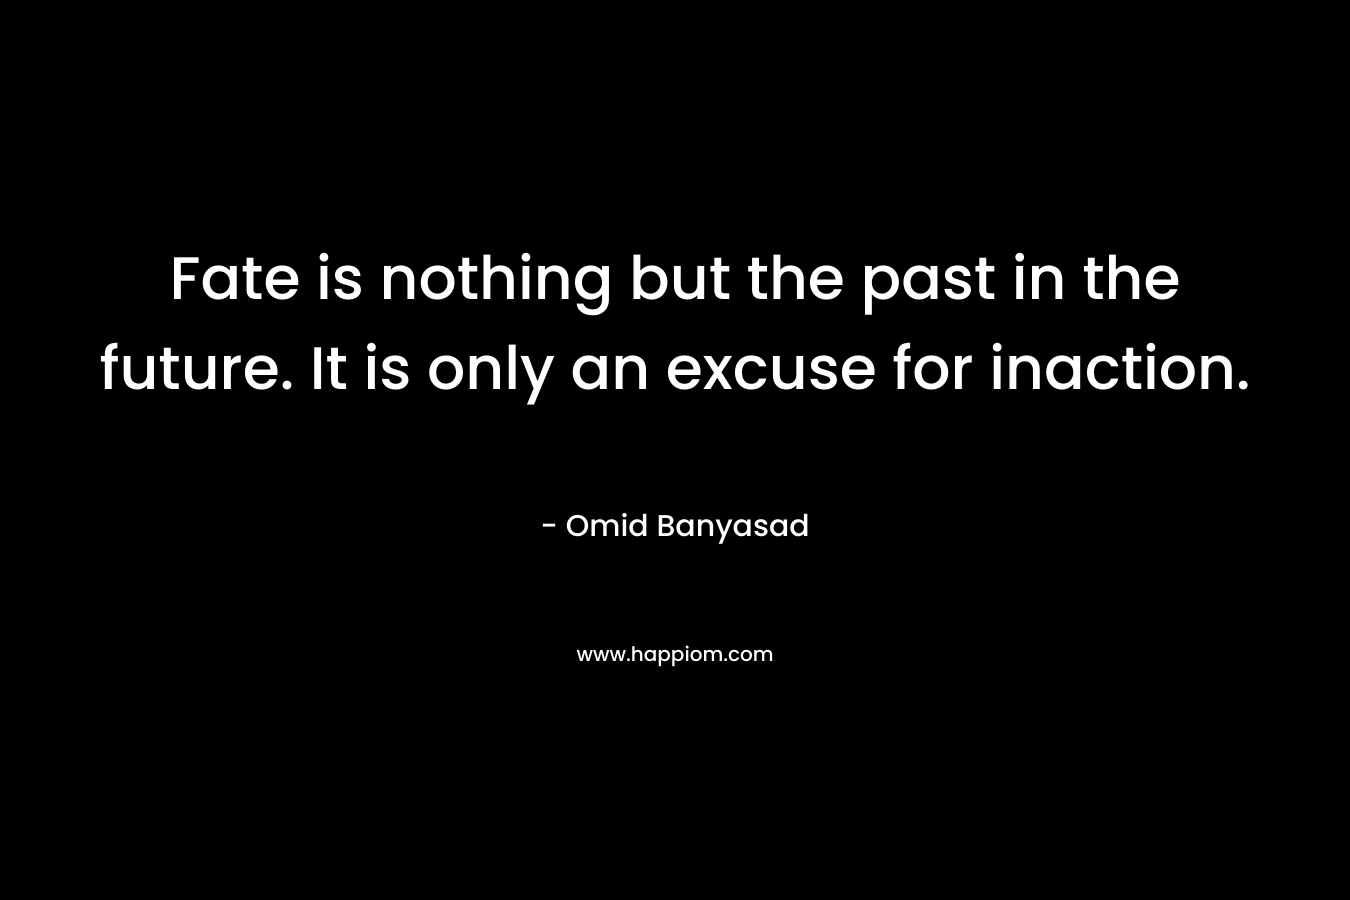 Fate is nothing but the past in the future. It is only an excuse for inaction. – Omid Banyasad